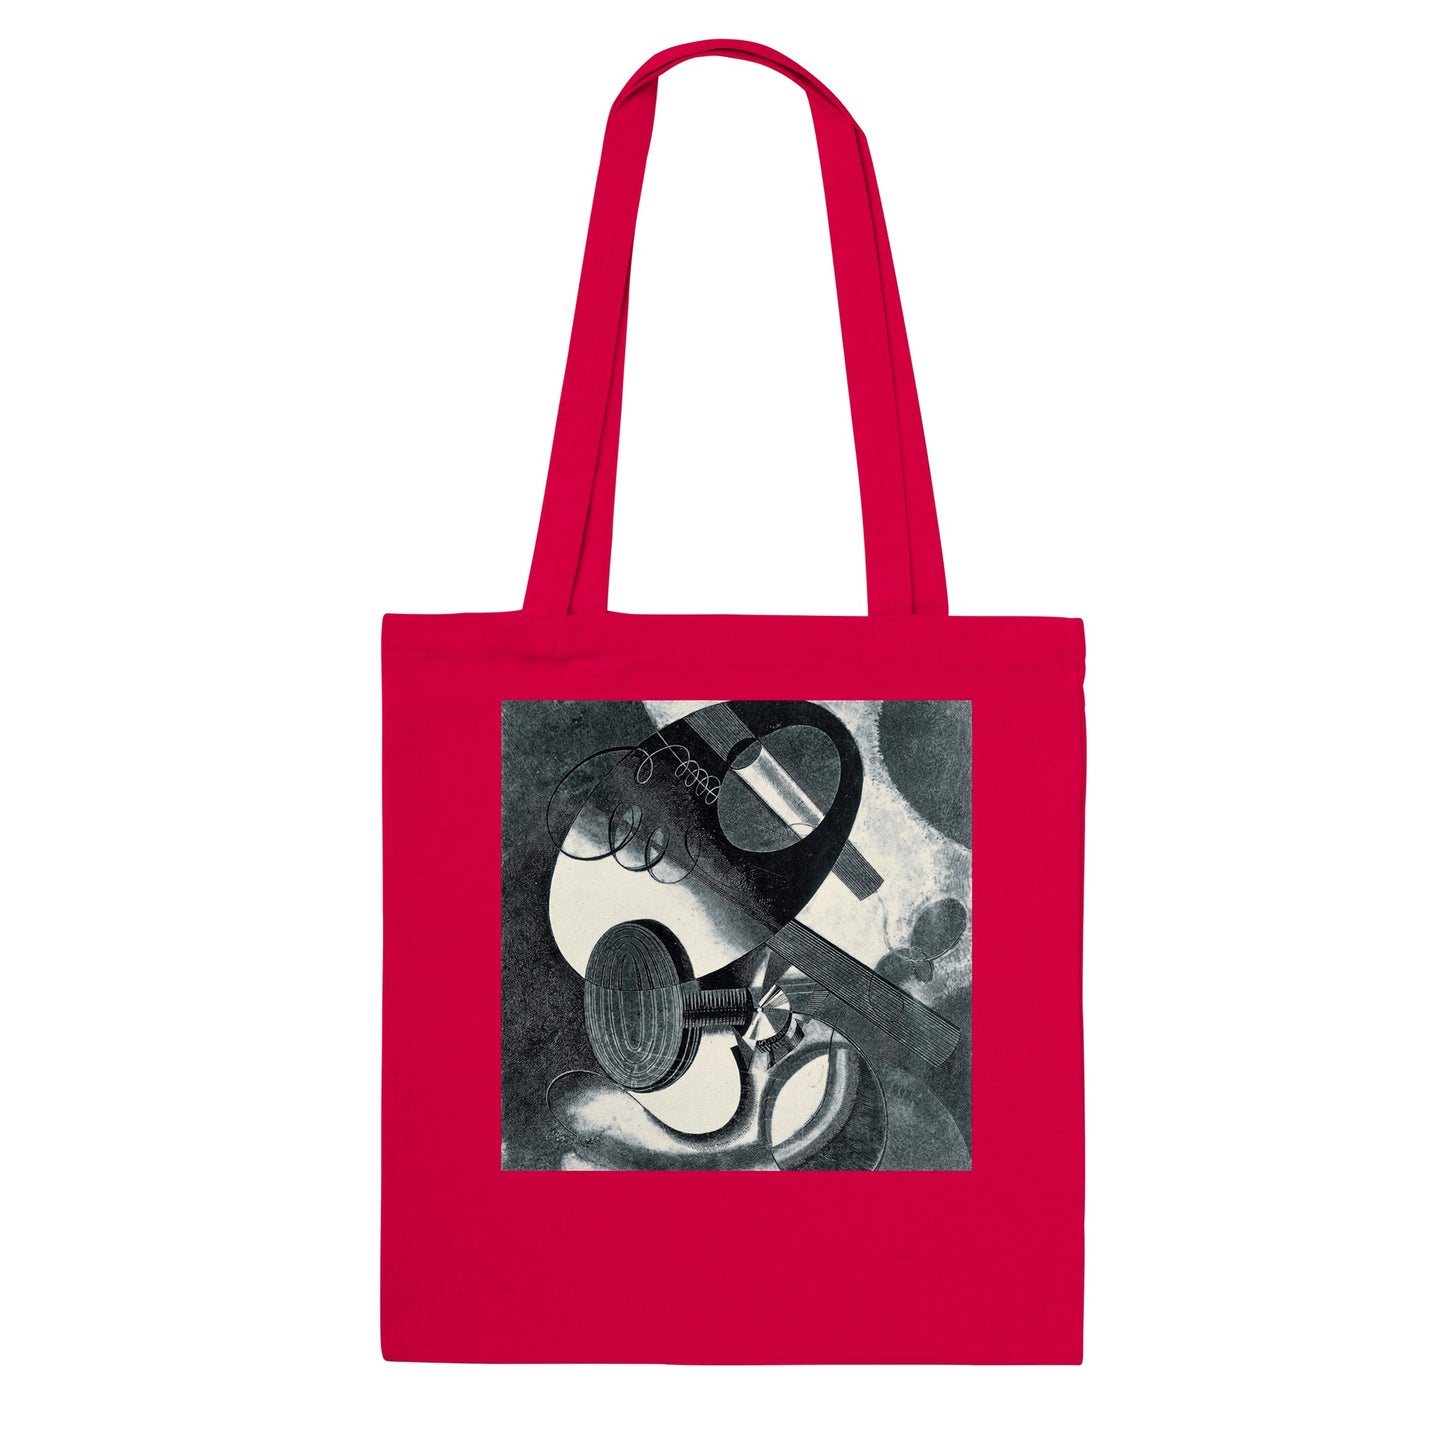 KAROL HILLER - HELIOGRAPHIC COMPOSITION (XXIX) (1936 - 1937) - CLASSIC TOTE BAG